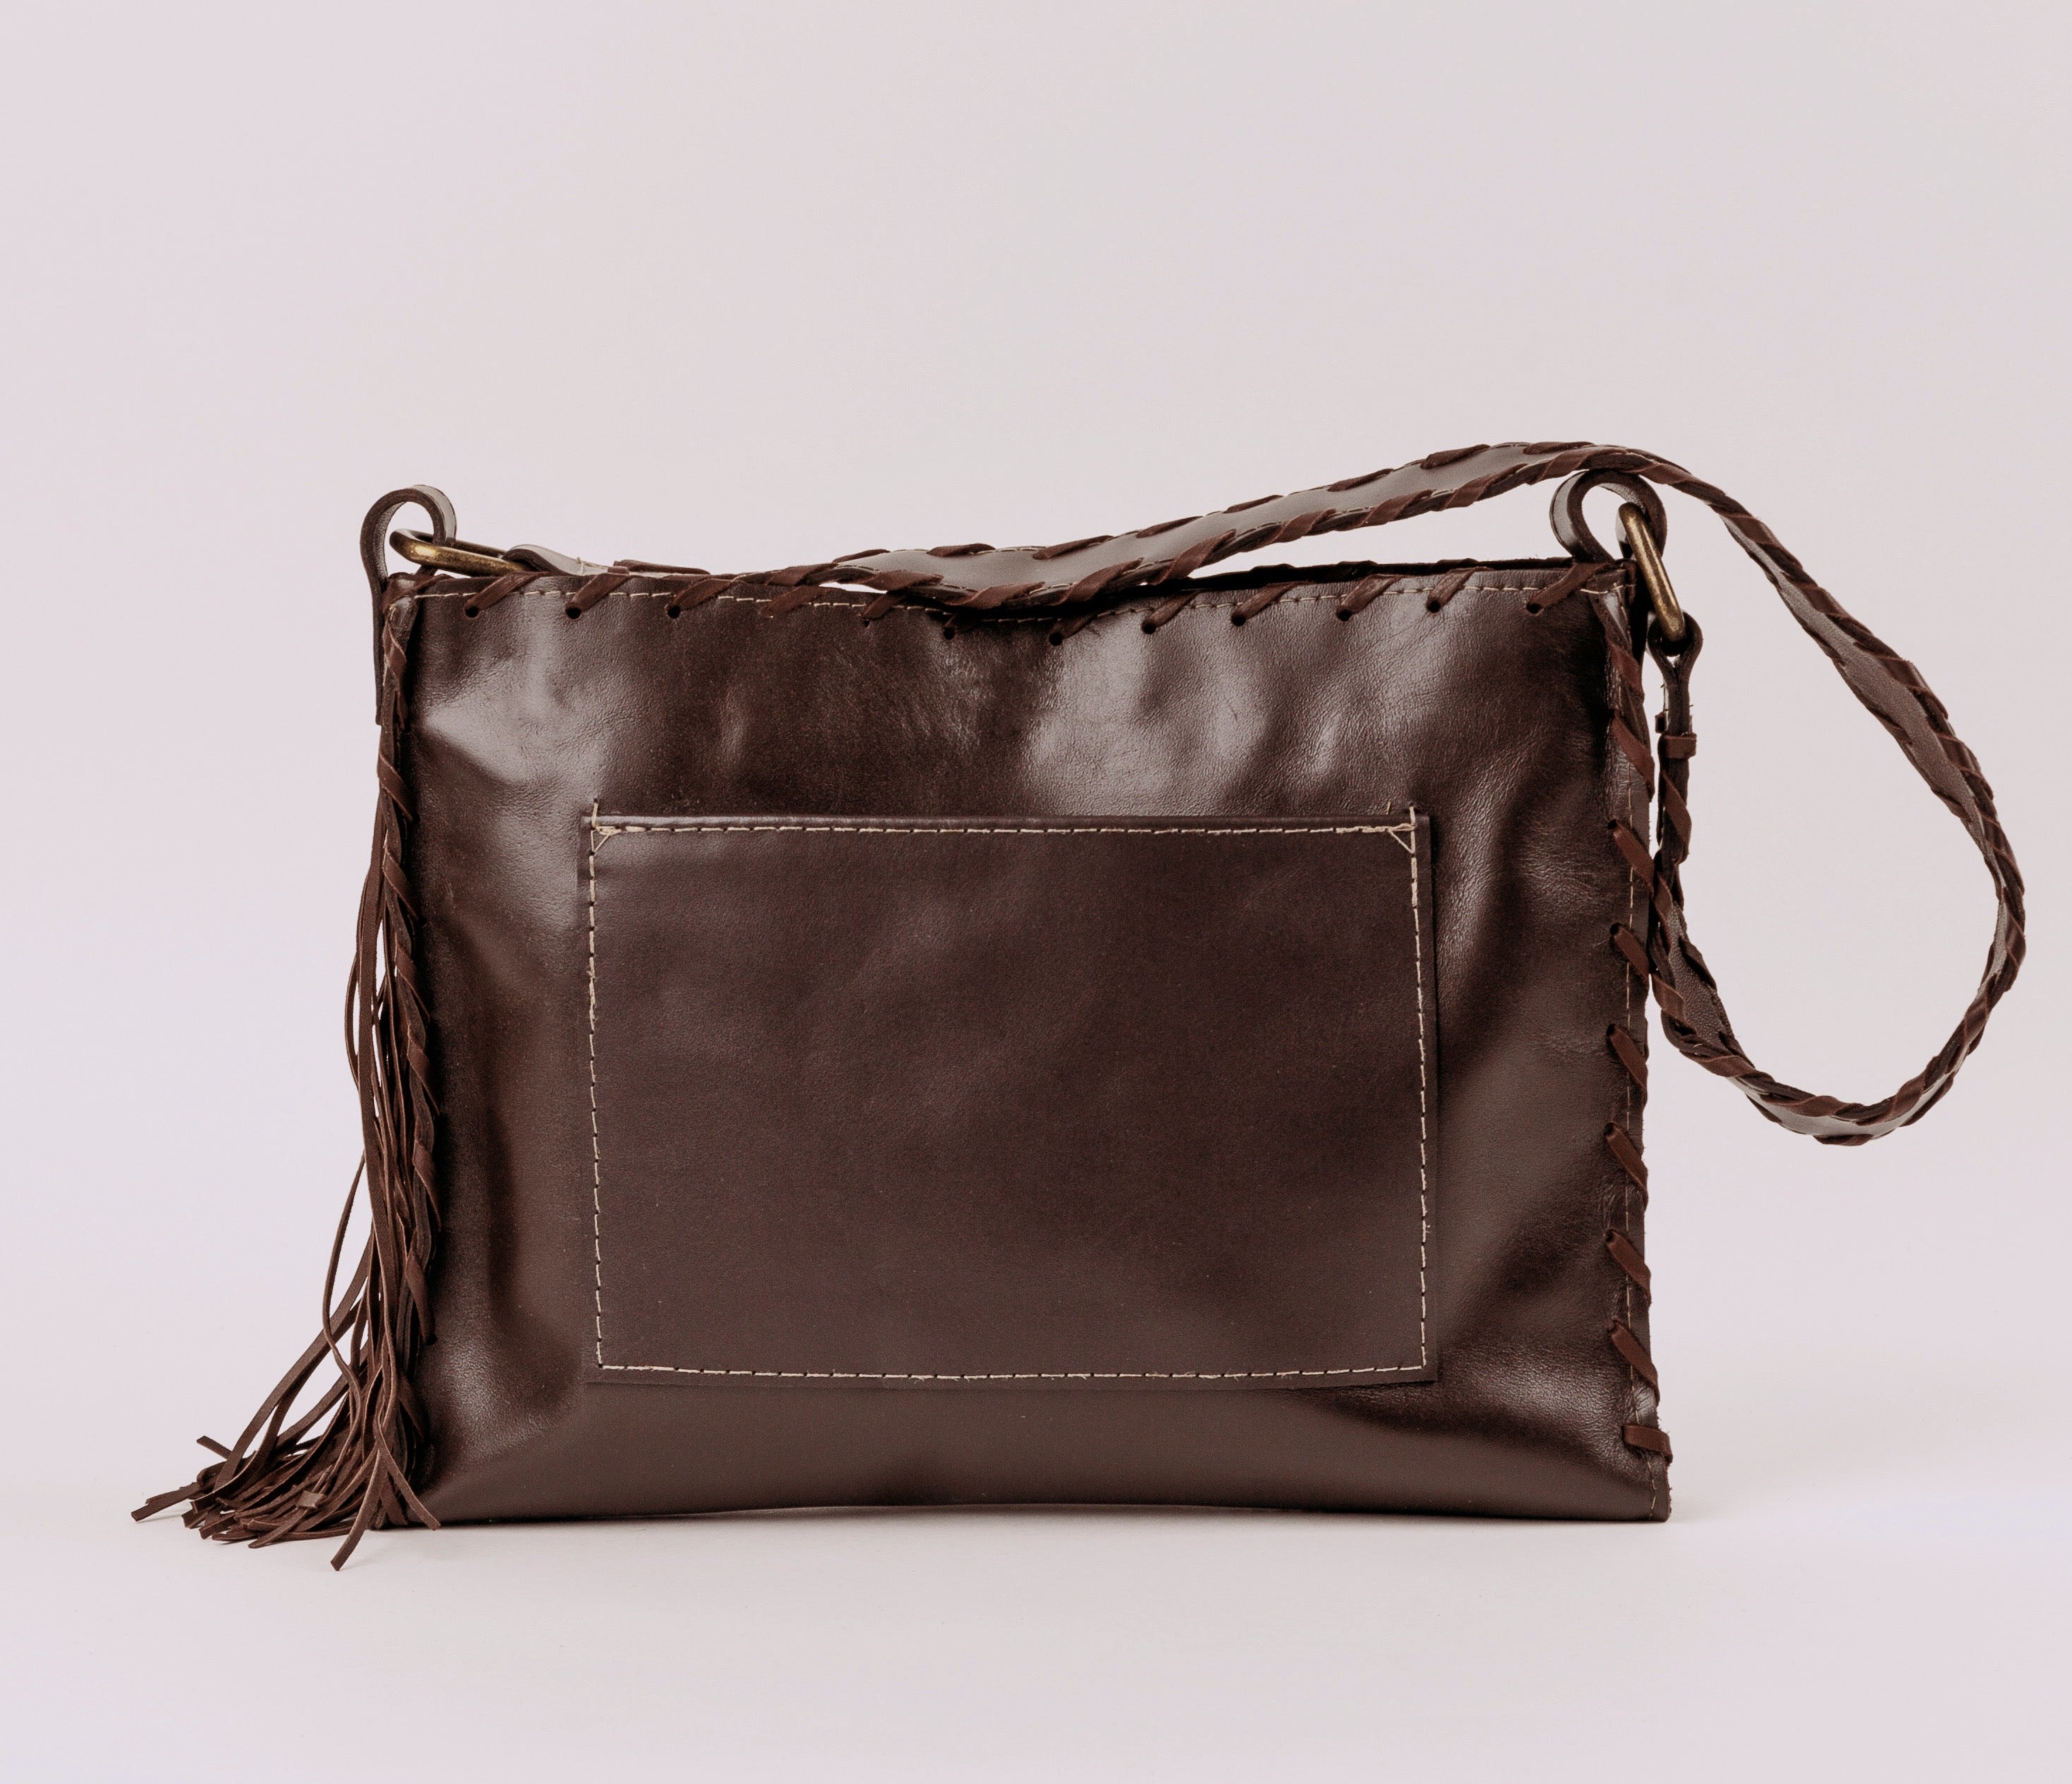 Brown and caramel colors Laredo Sepia leather